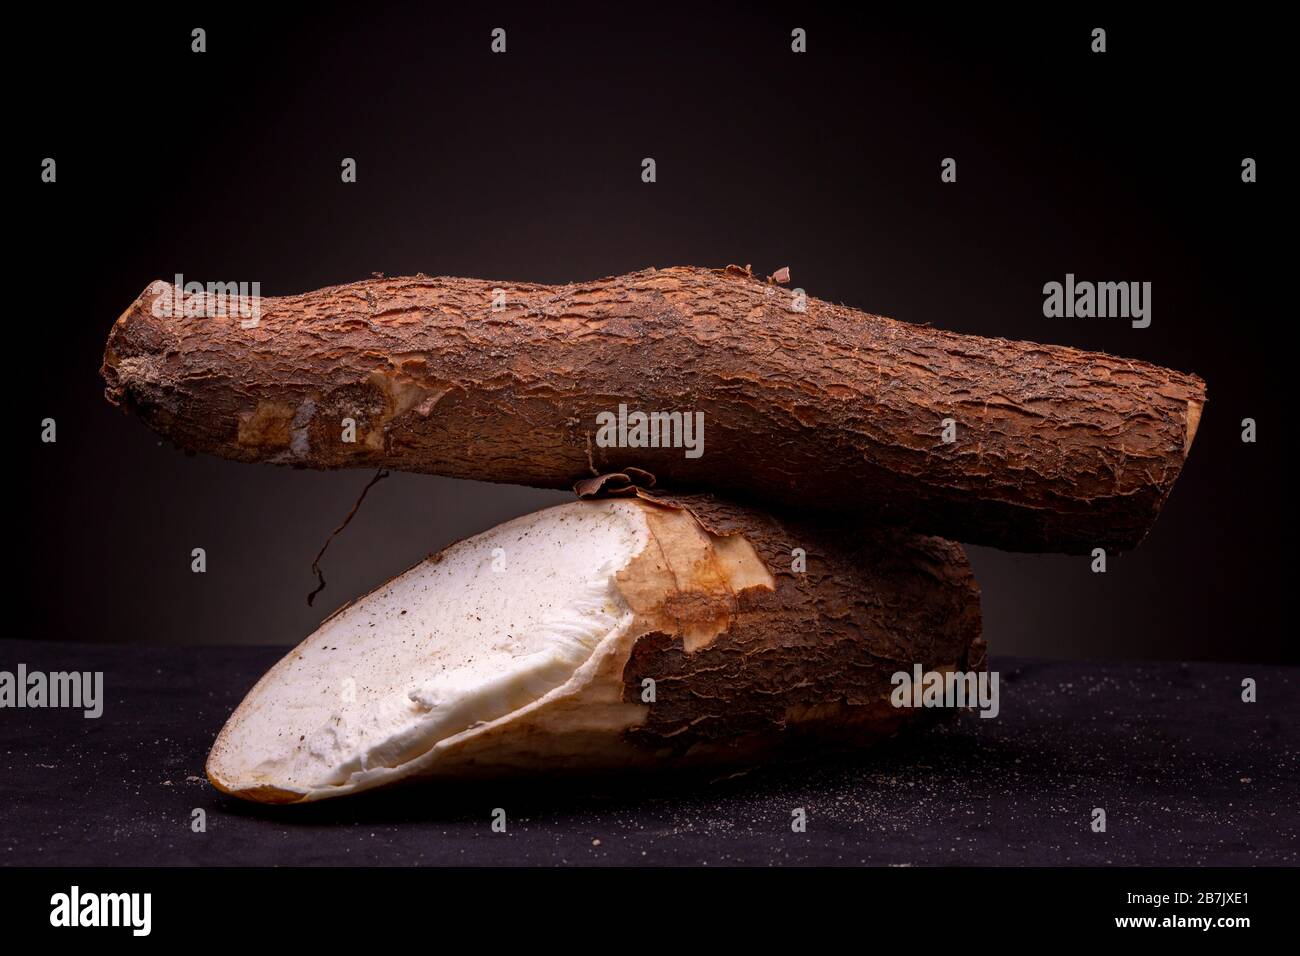 Unprepared samples of Cassava root with bark intact and white edible inside visible. Still life studio shot with texture of shrub against a dark grey Stock Photo